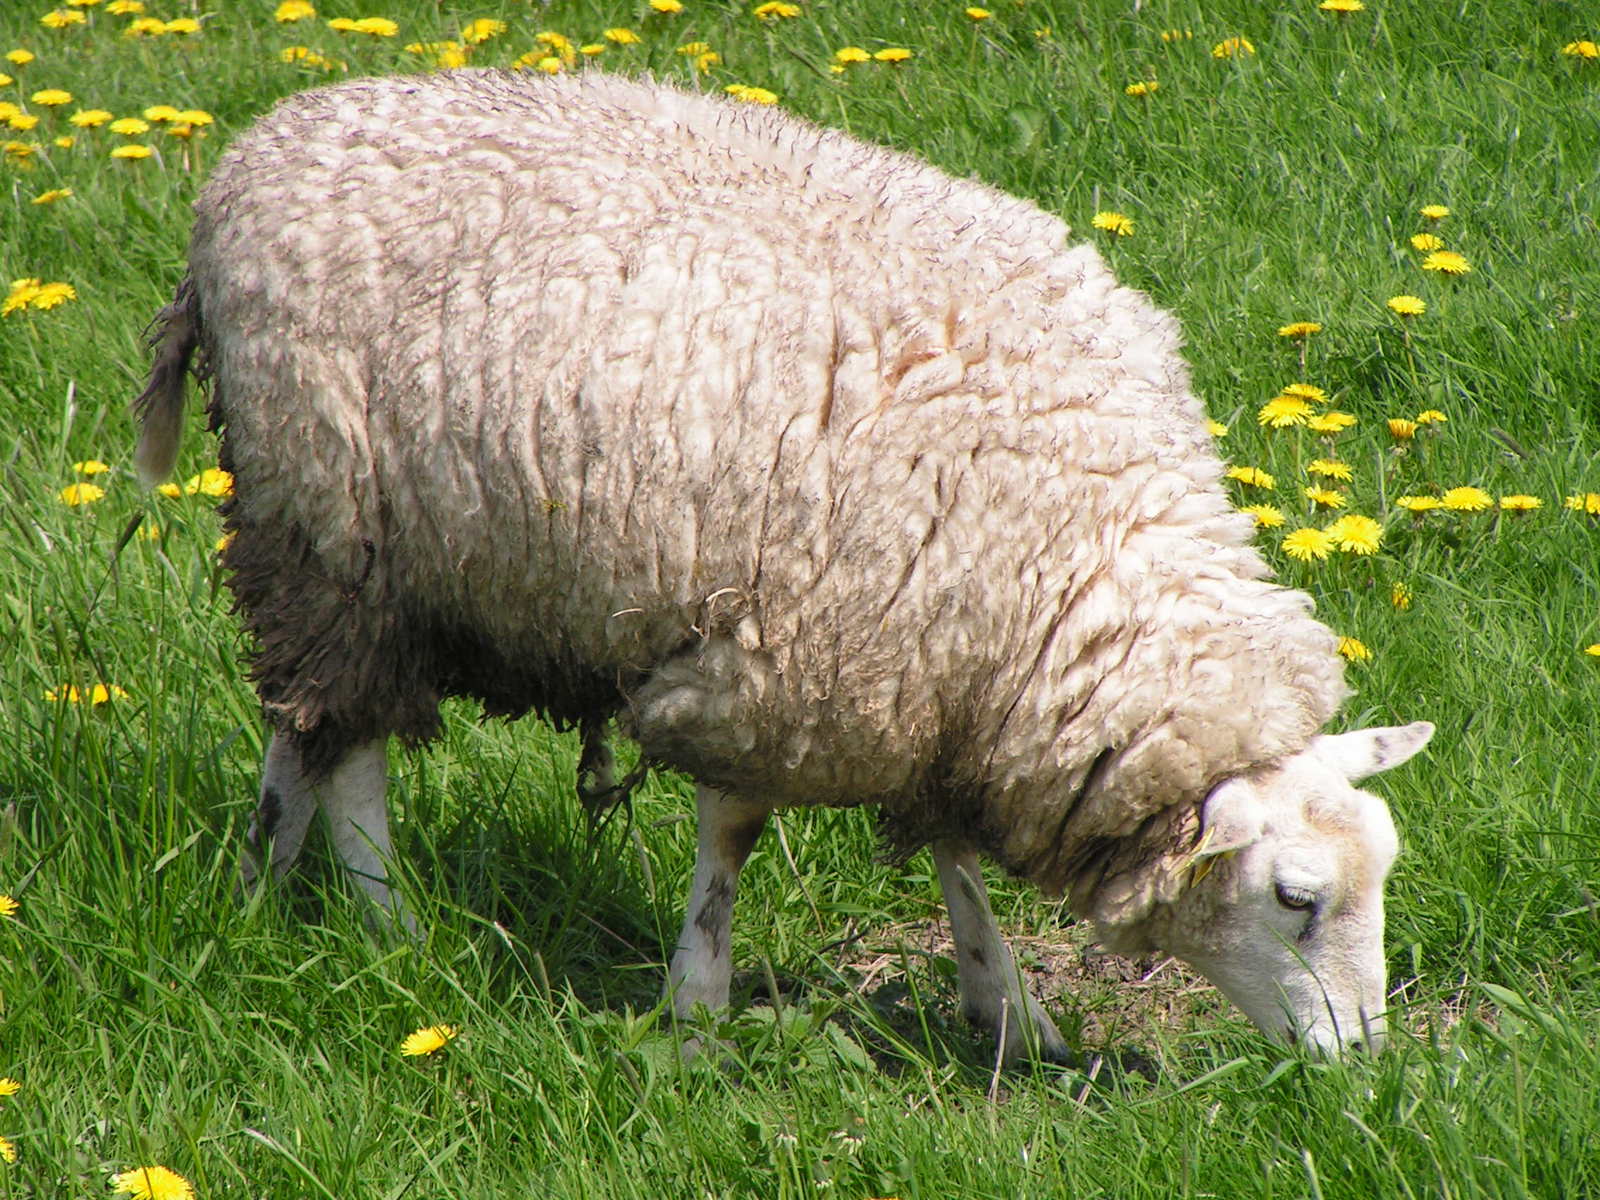 sheep grazing on the grass in the meadow